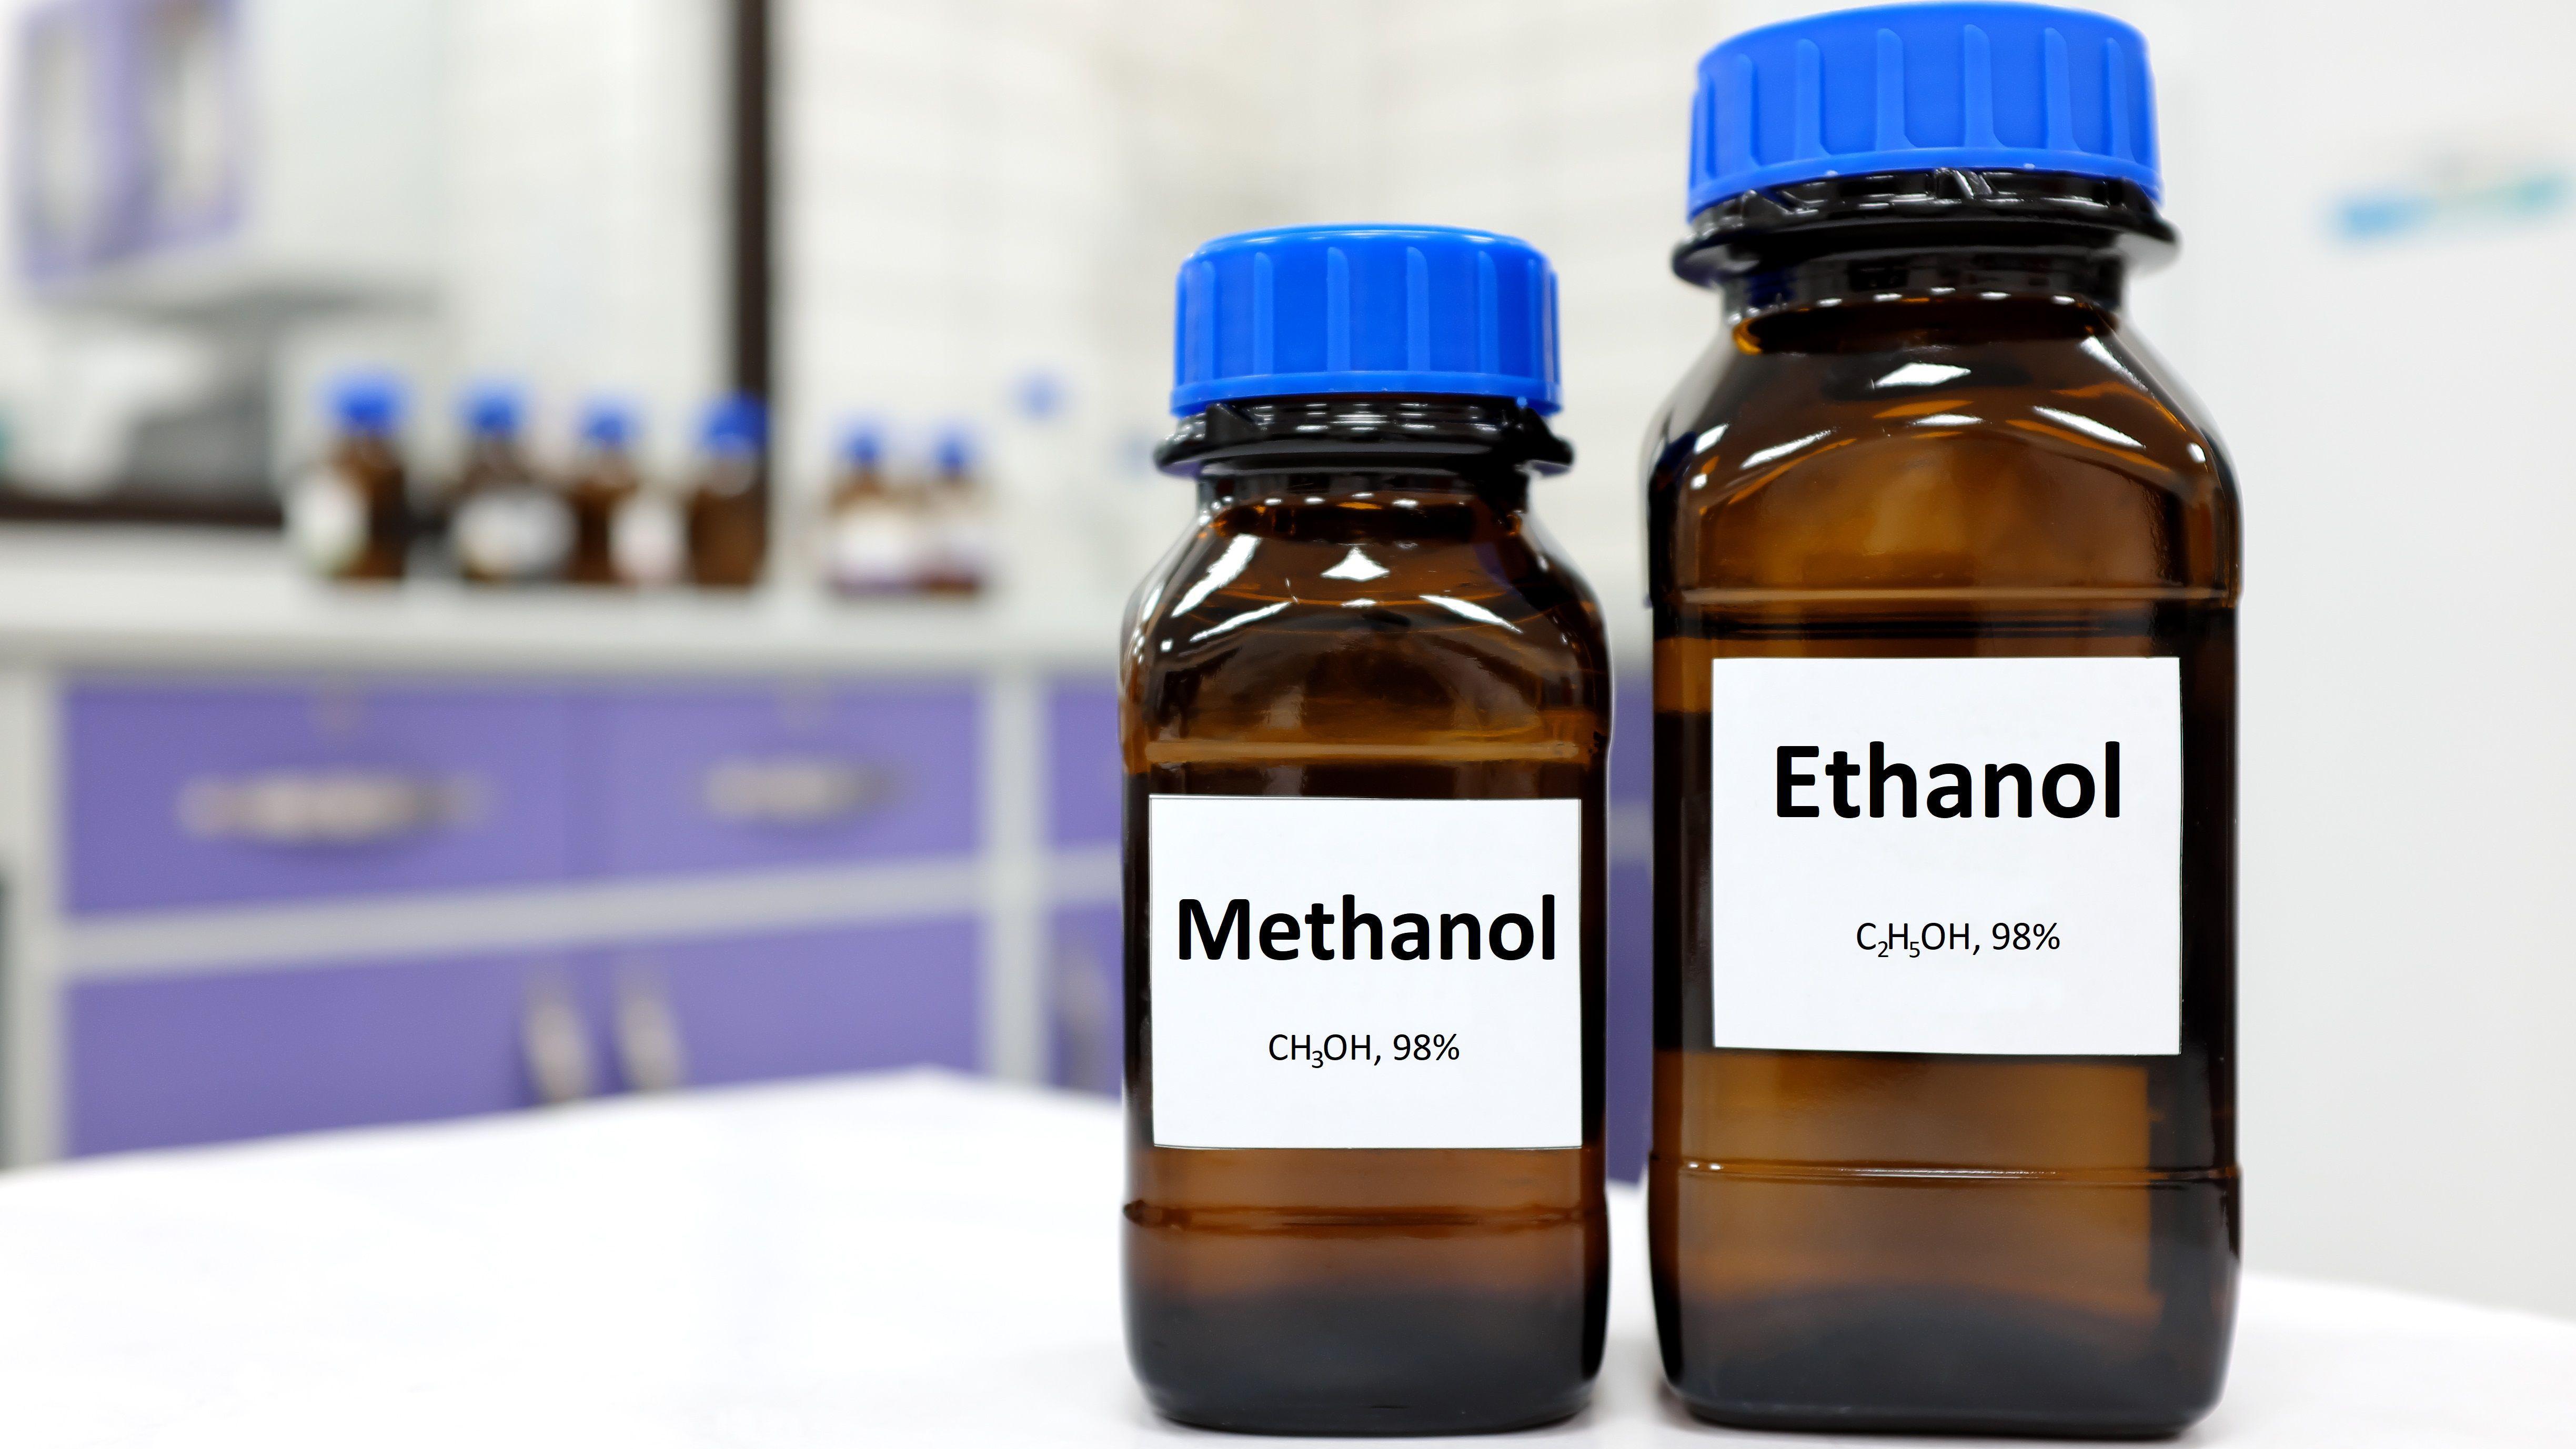 Two glass bottles of ethanol and methanol displayed on a table